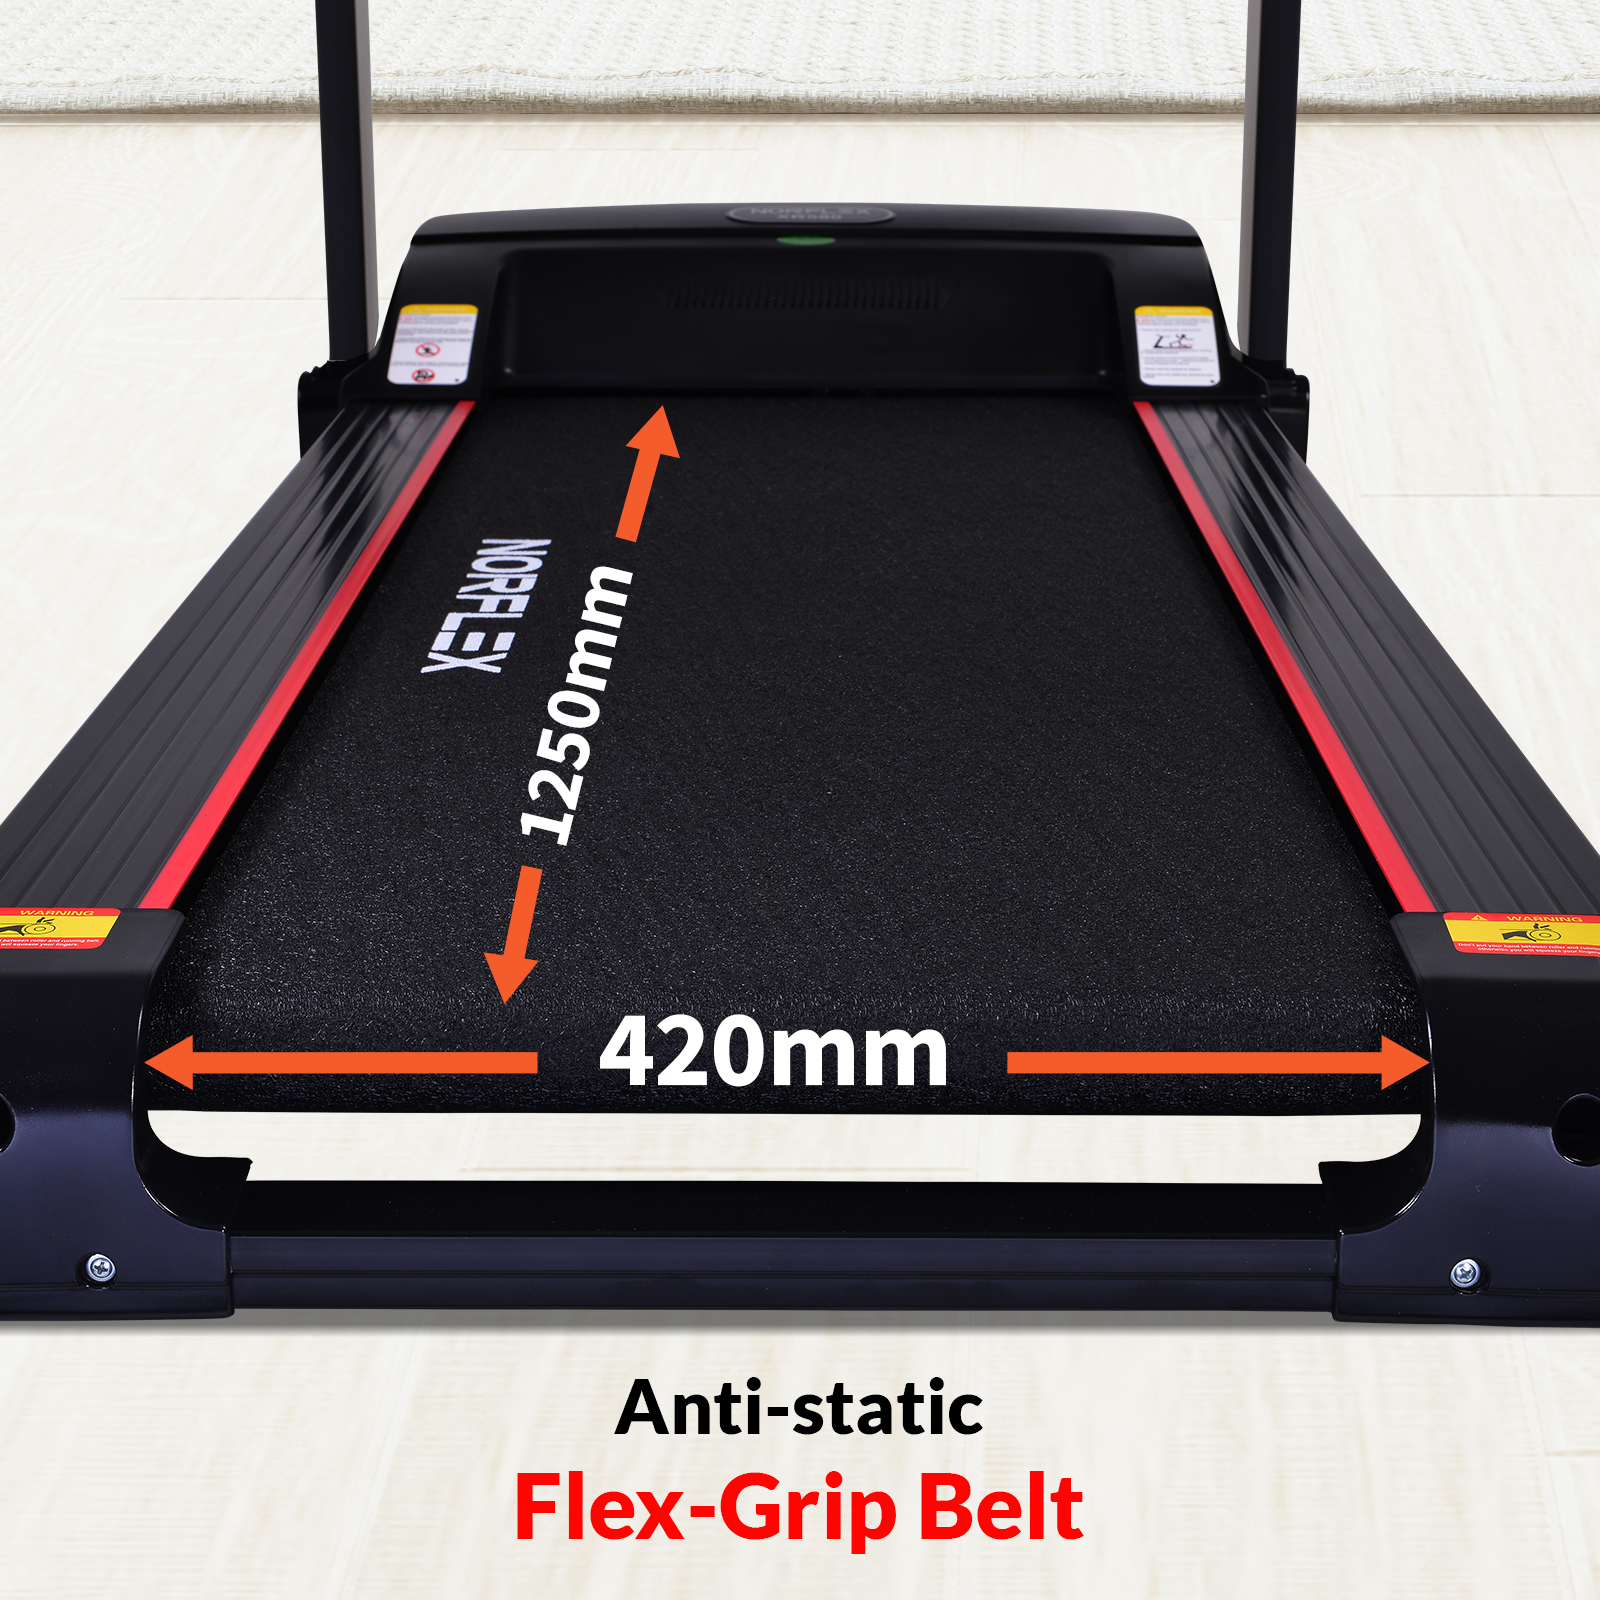 NORFLX New Electric Treadmill Auto Incline Home Gym Exercise Mat Fitness Run